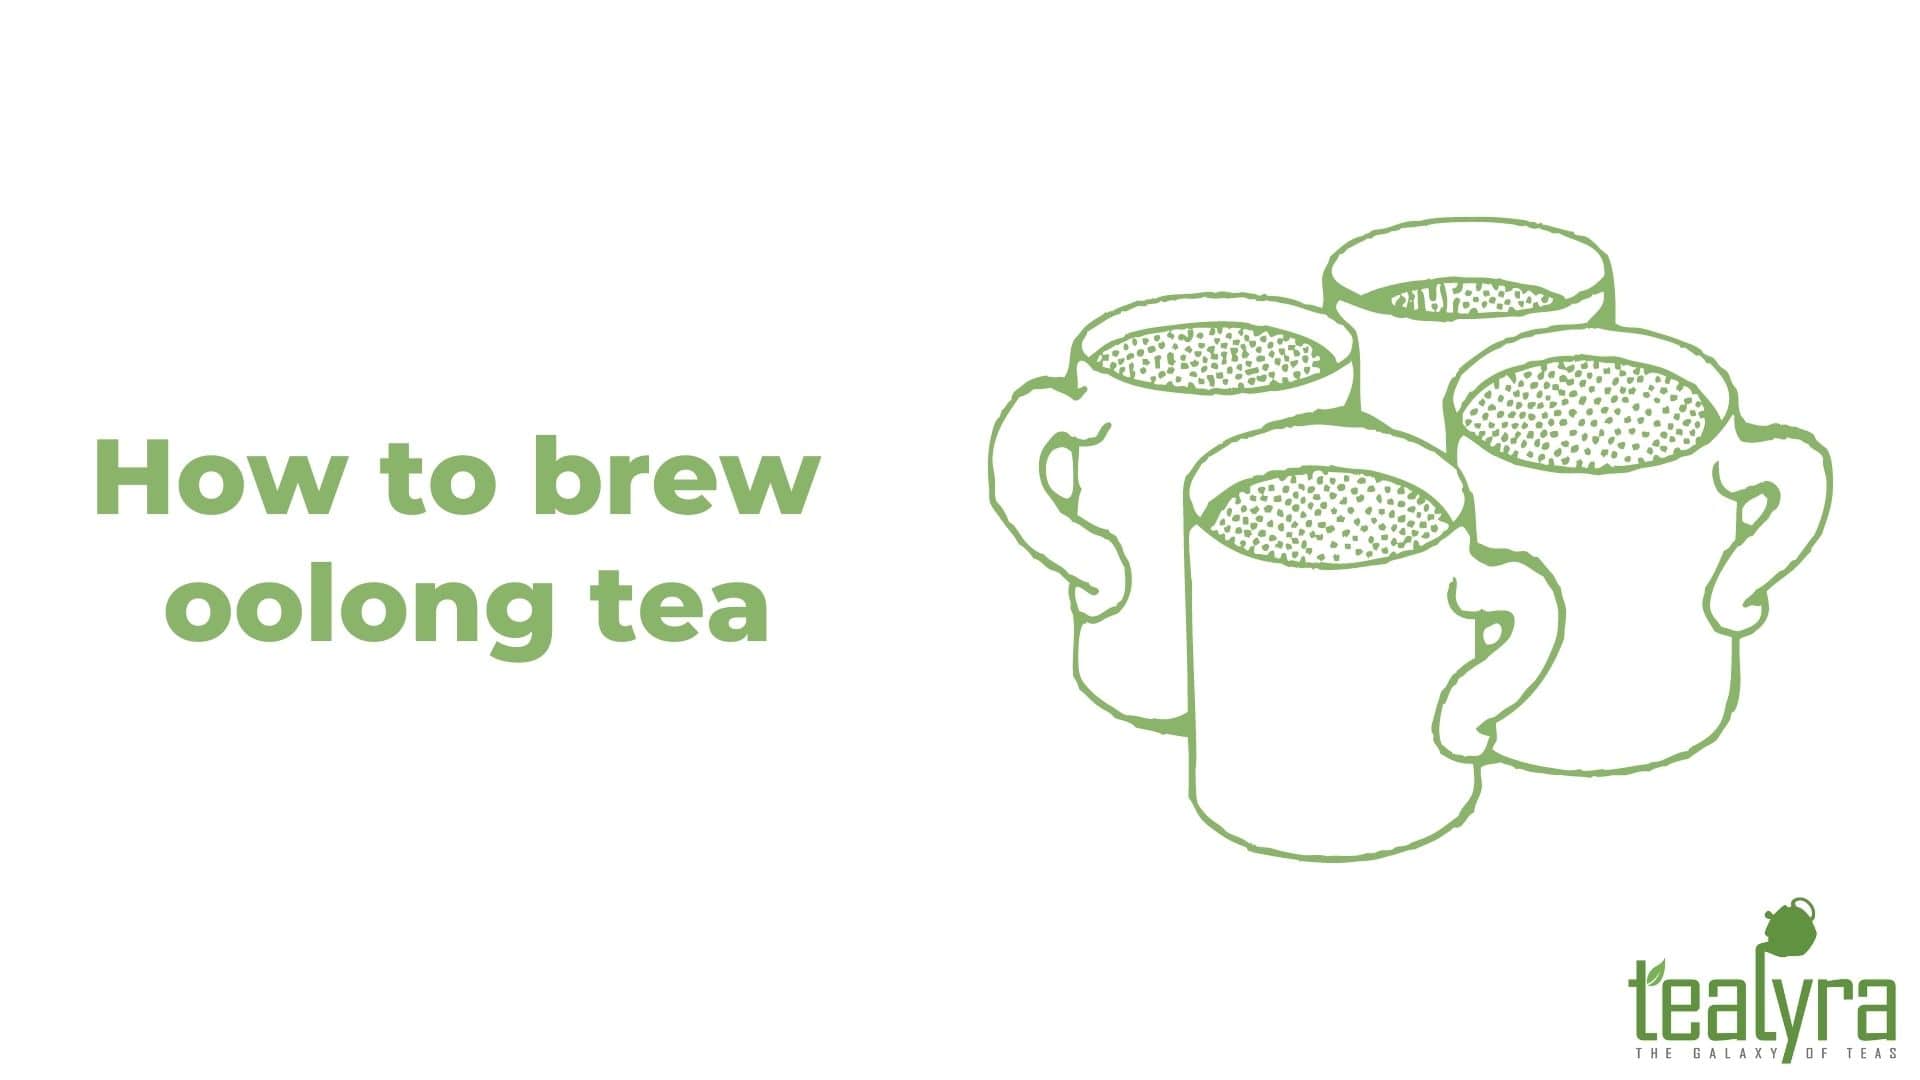 image-how-to-brew-oolong-tea